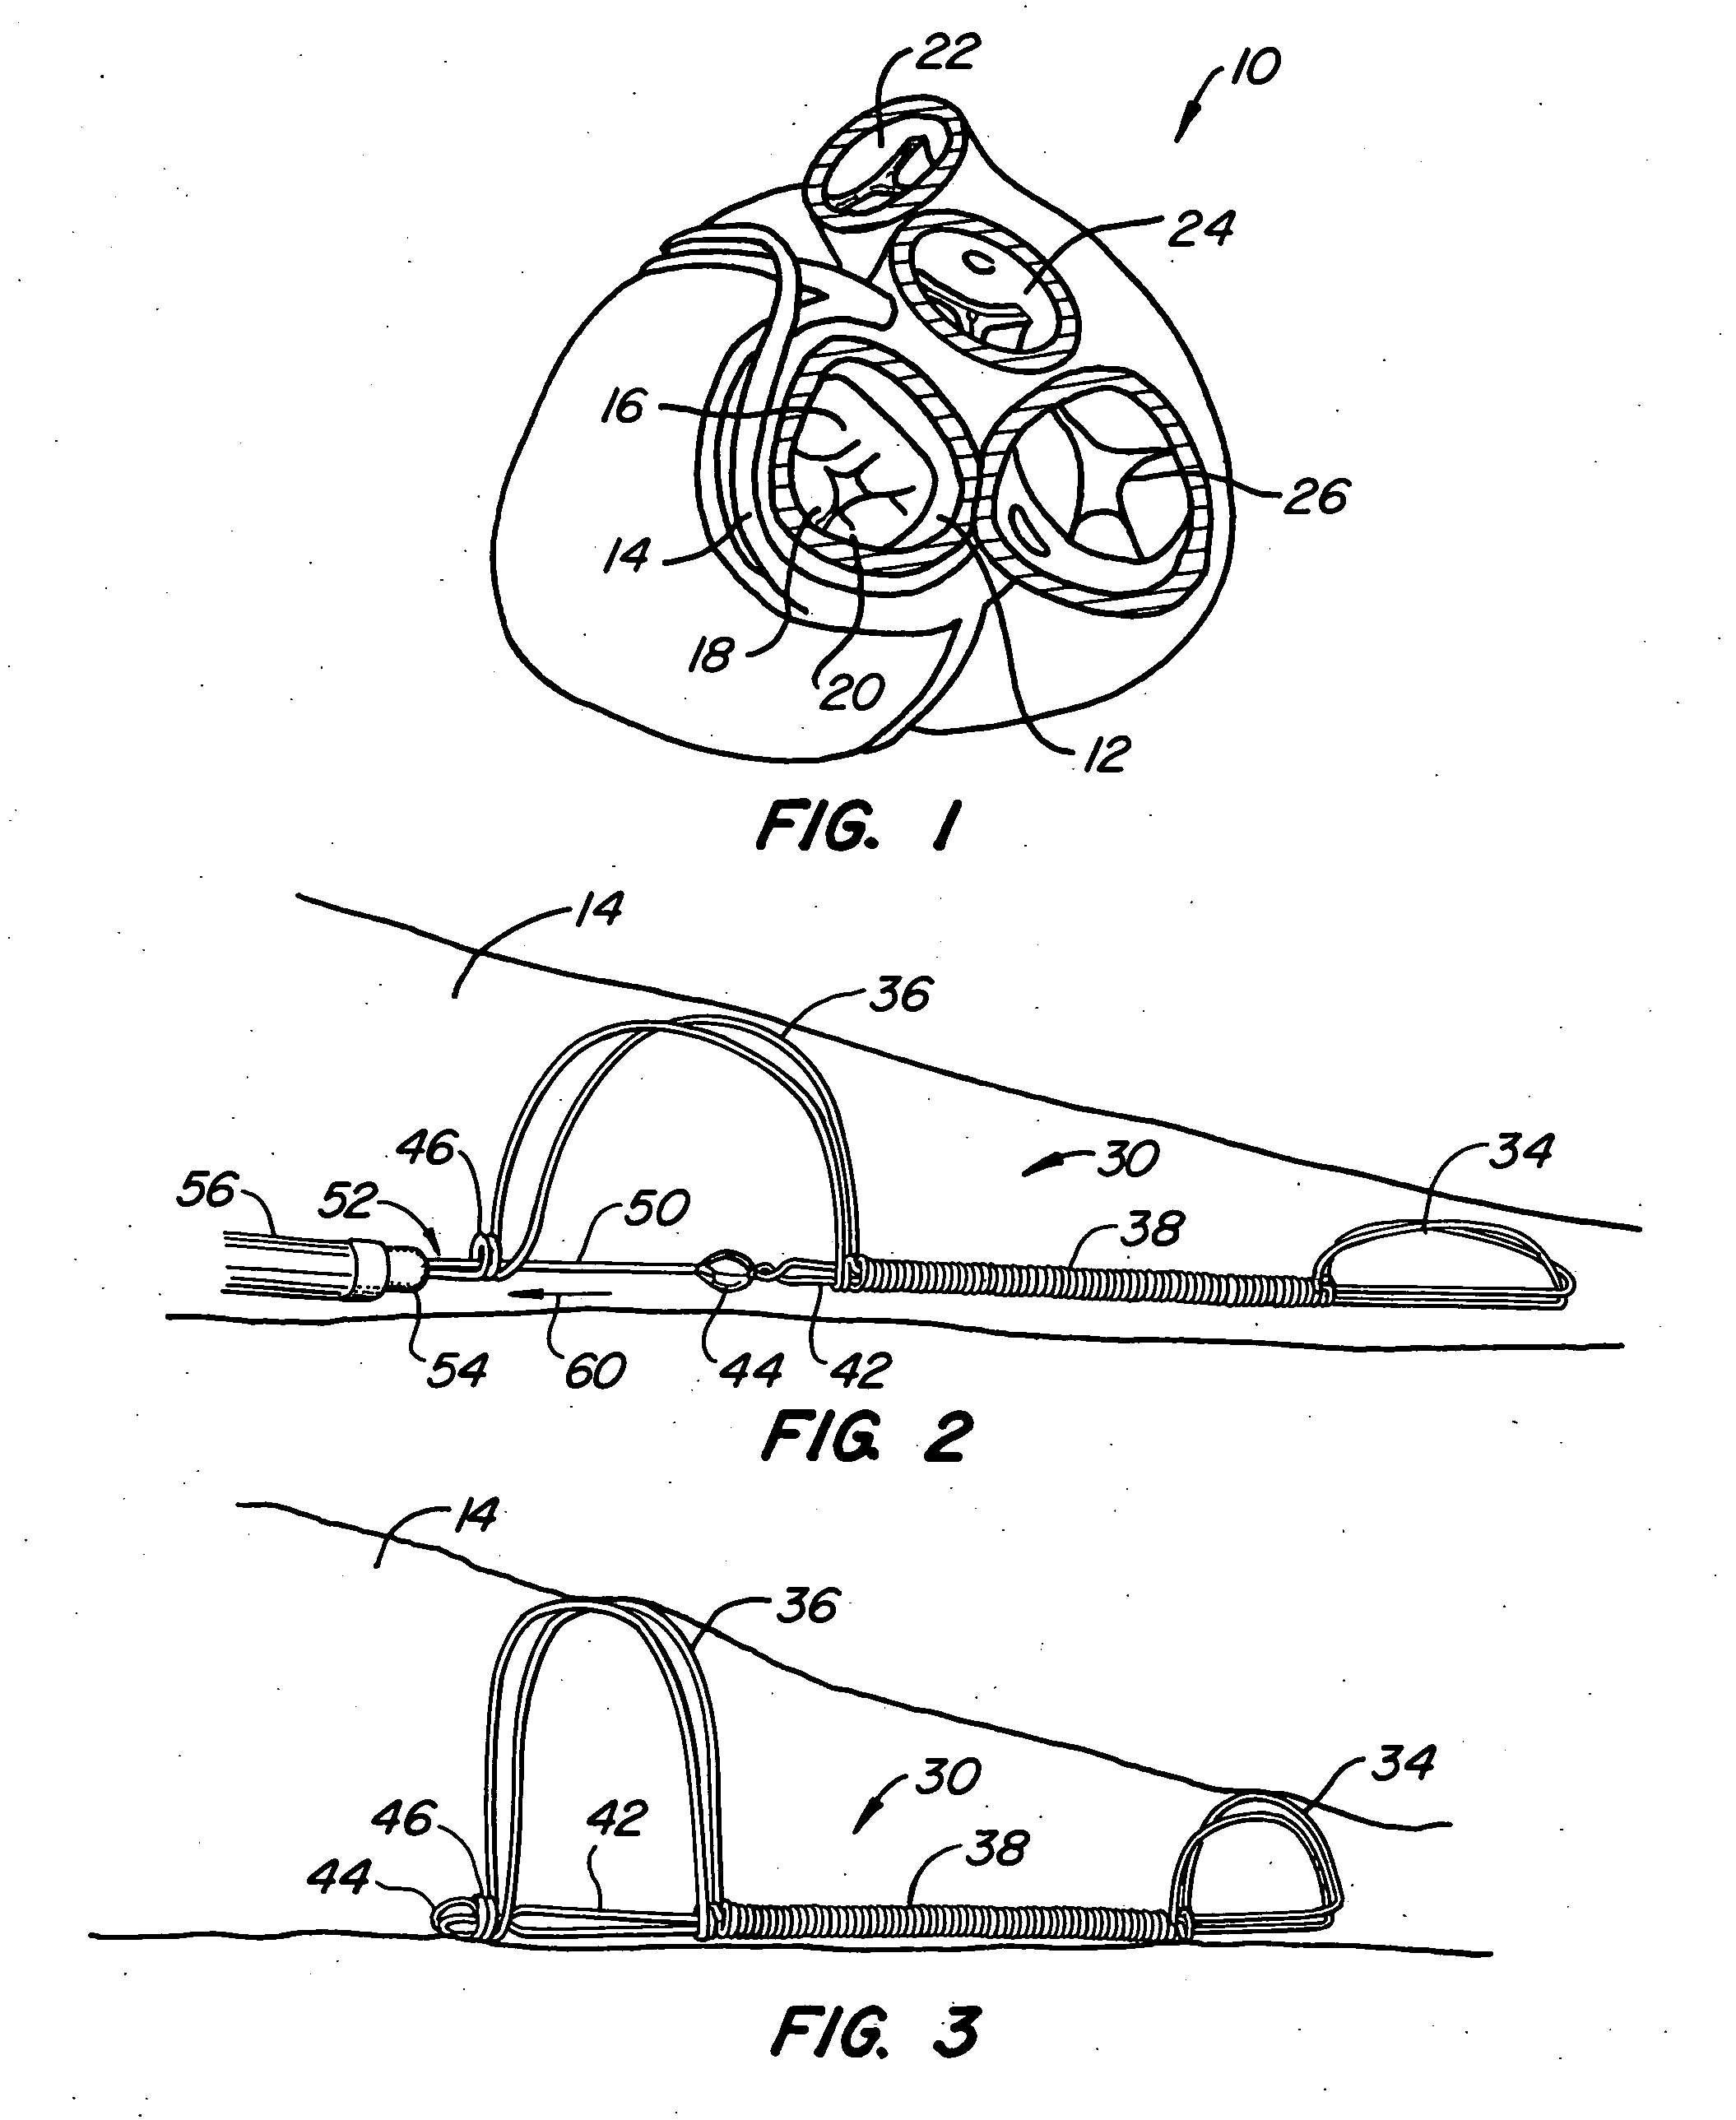 Device, system and method to affect the mitral valve annulus of a heart